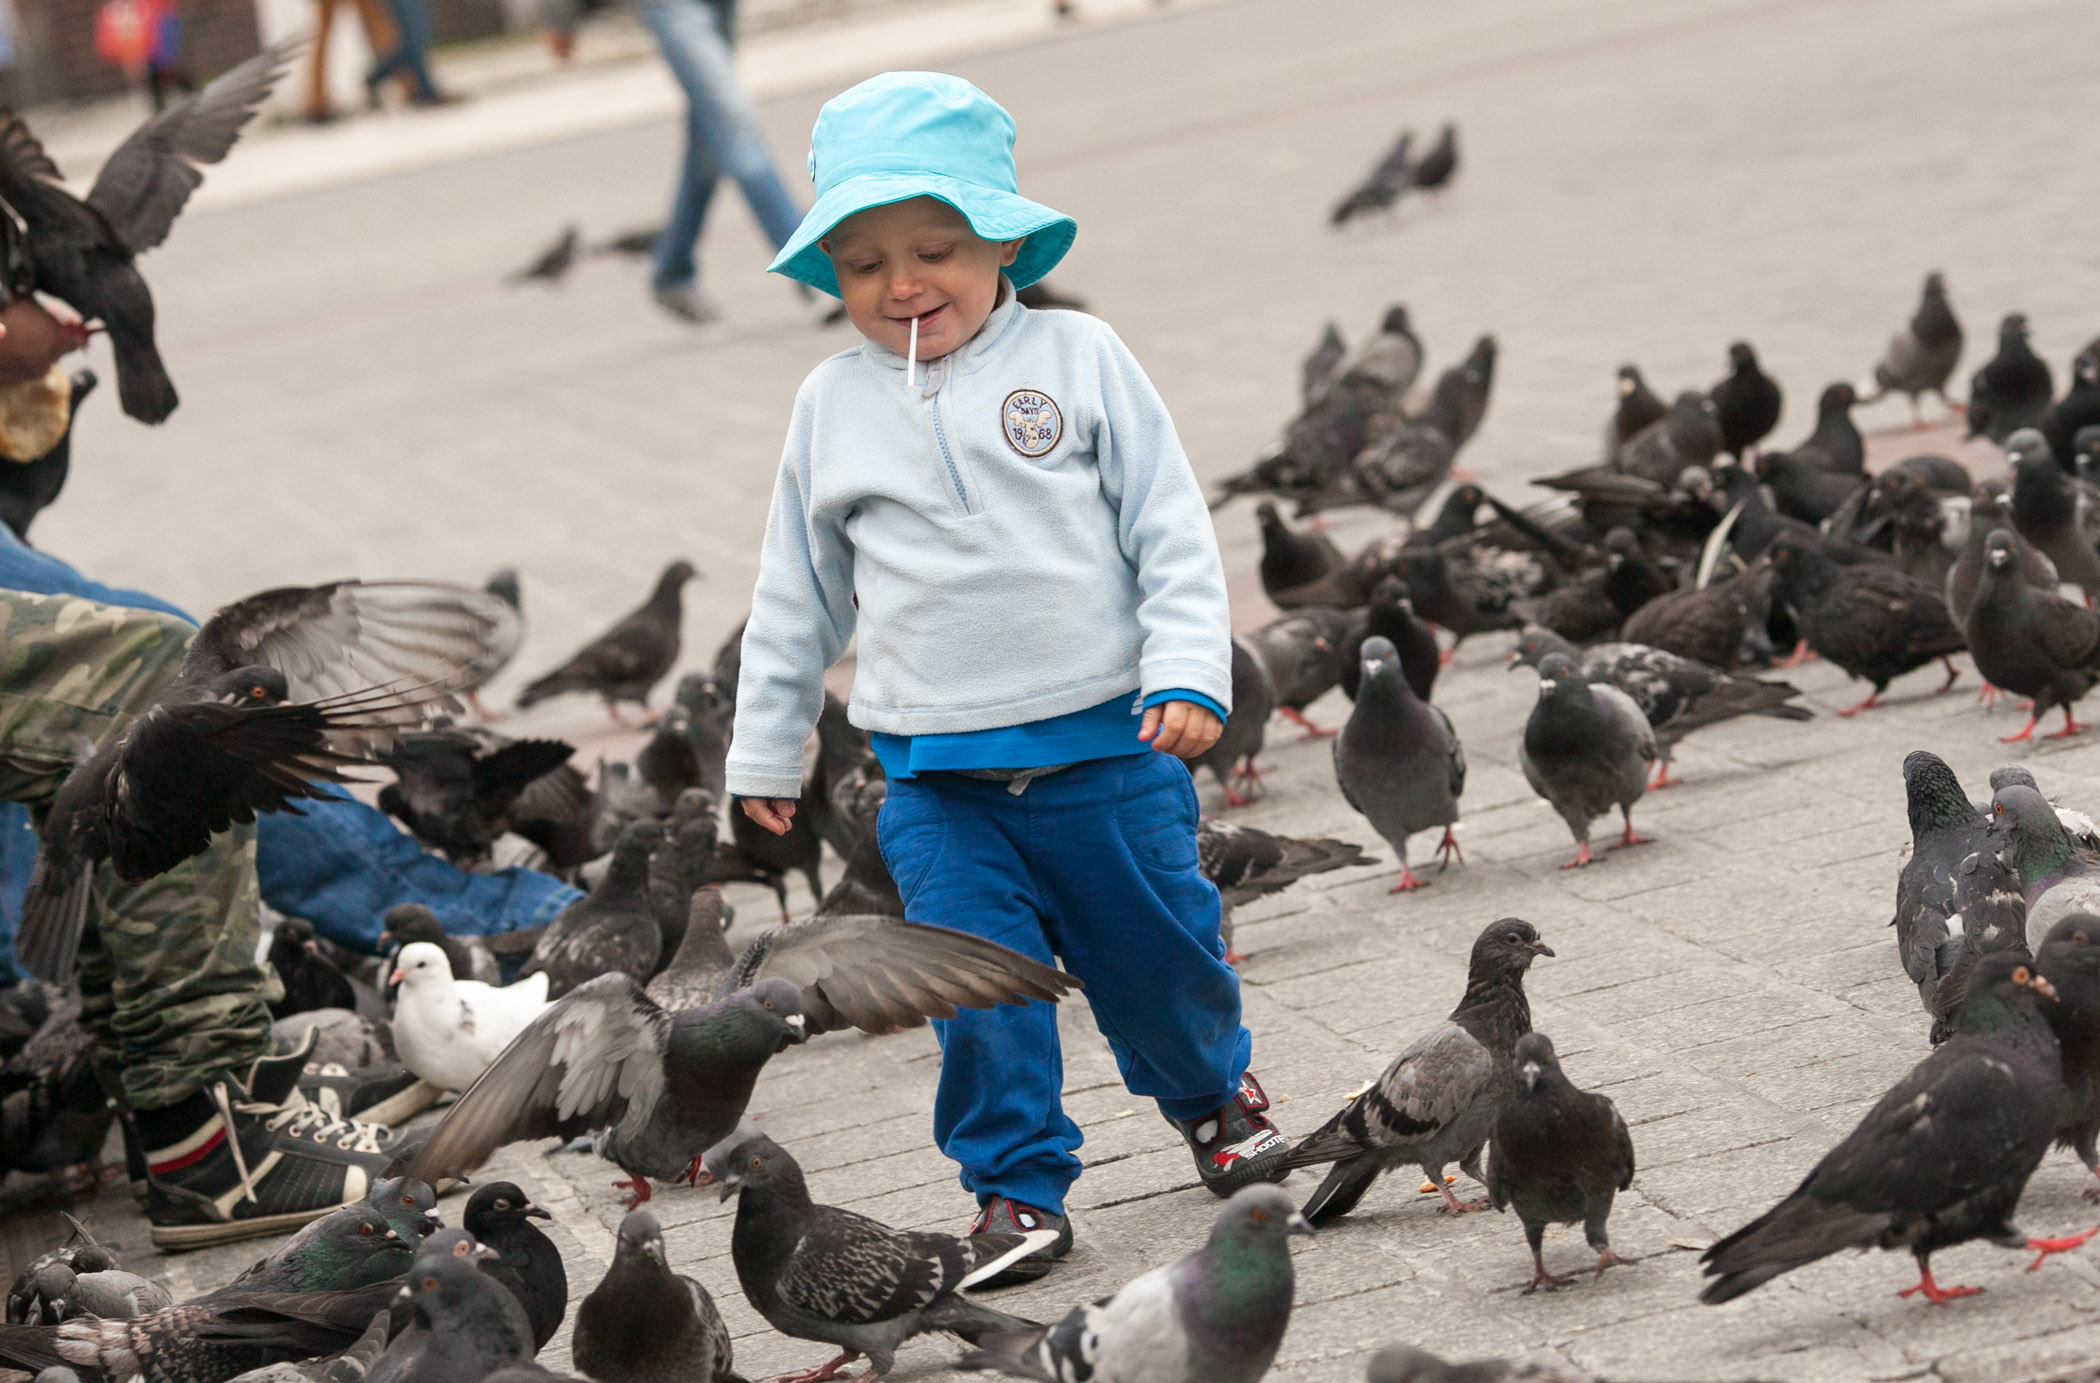 Among the pigeons at Krakow Main Square